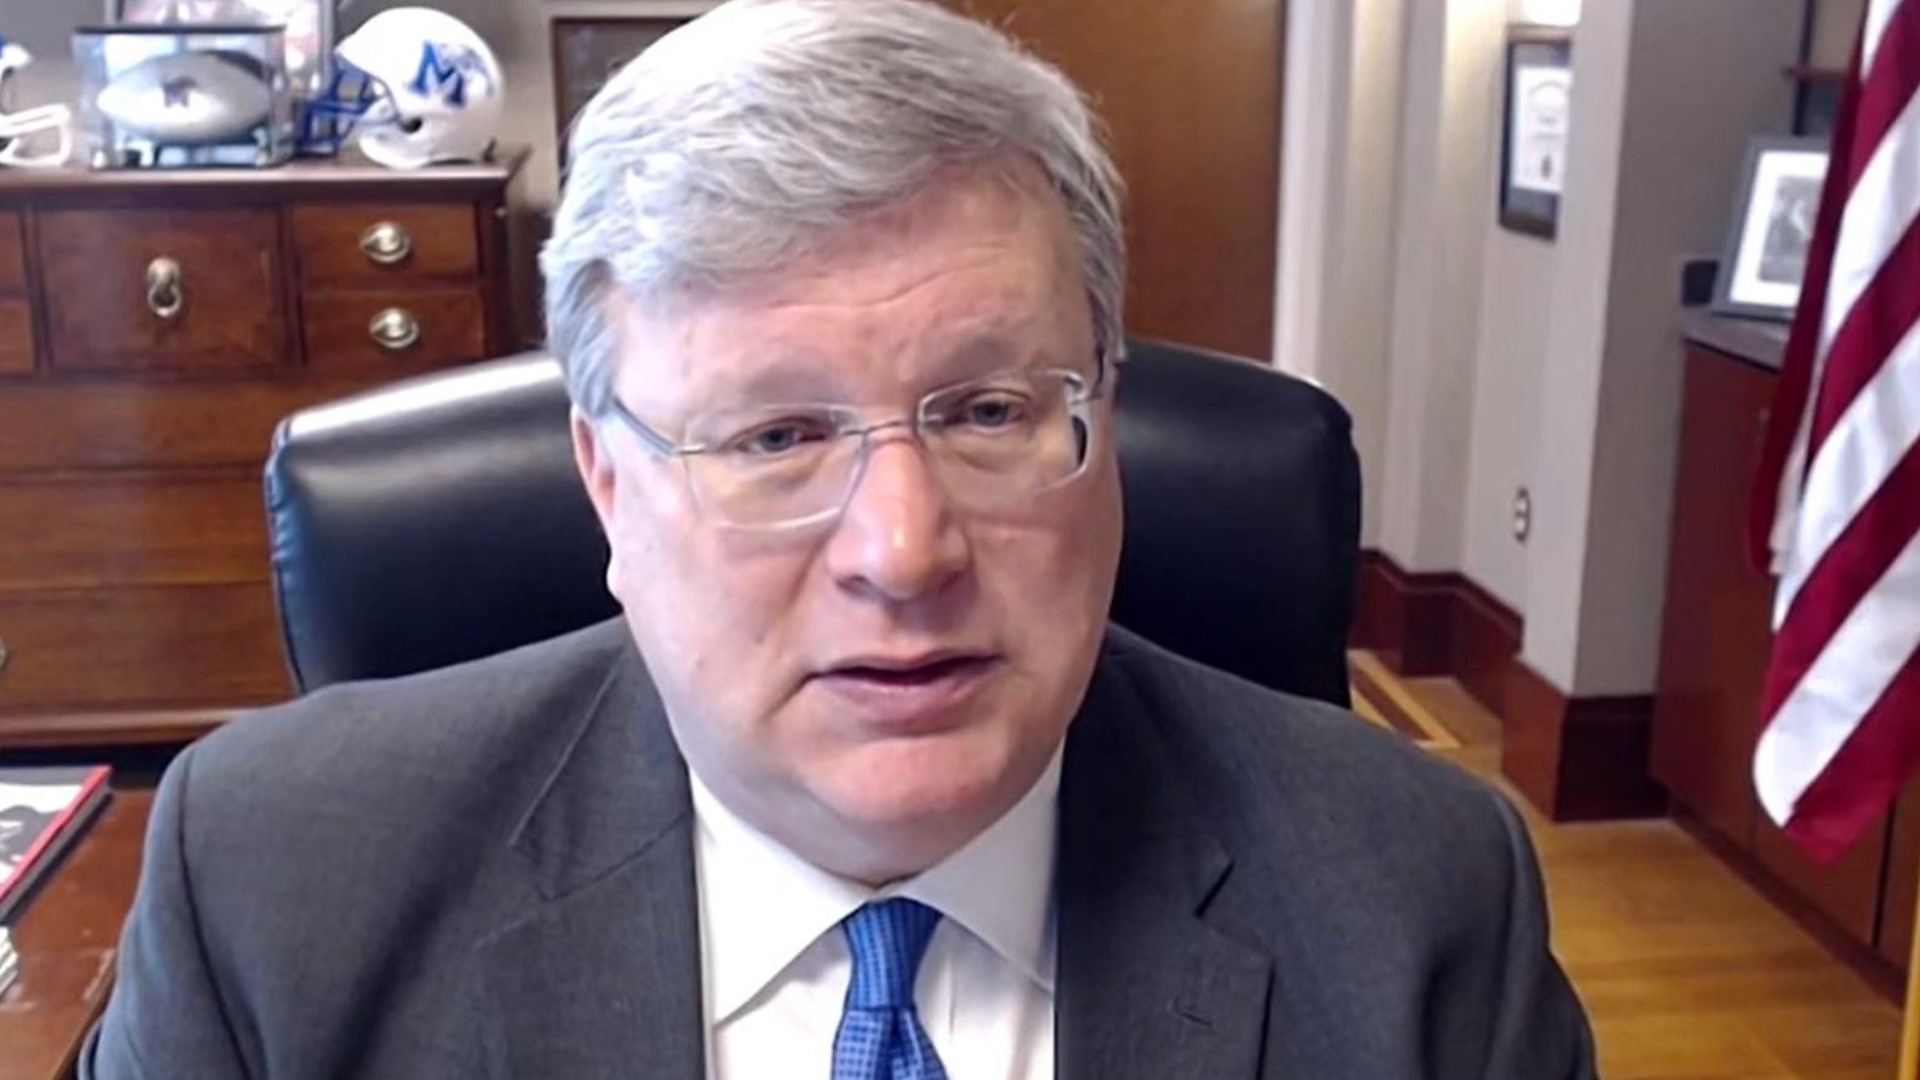 Mayor Jim Strickland reacts to Paul Young winning the Memphis mayor's